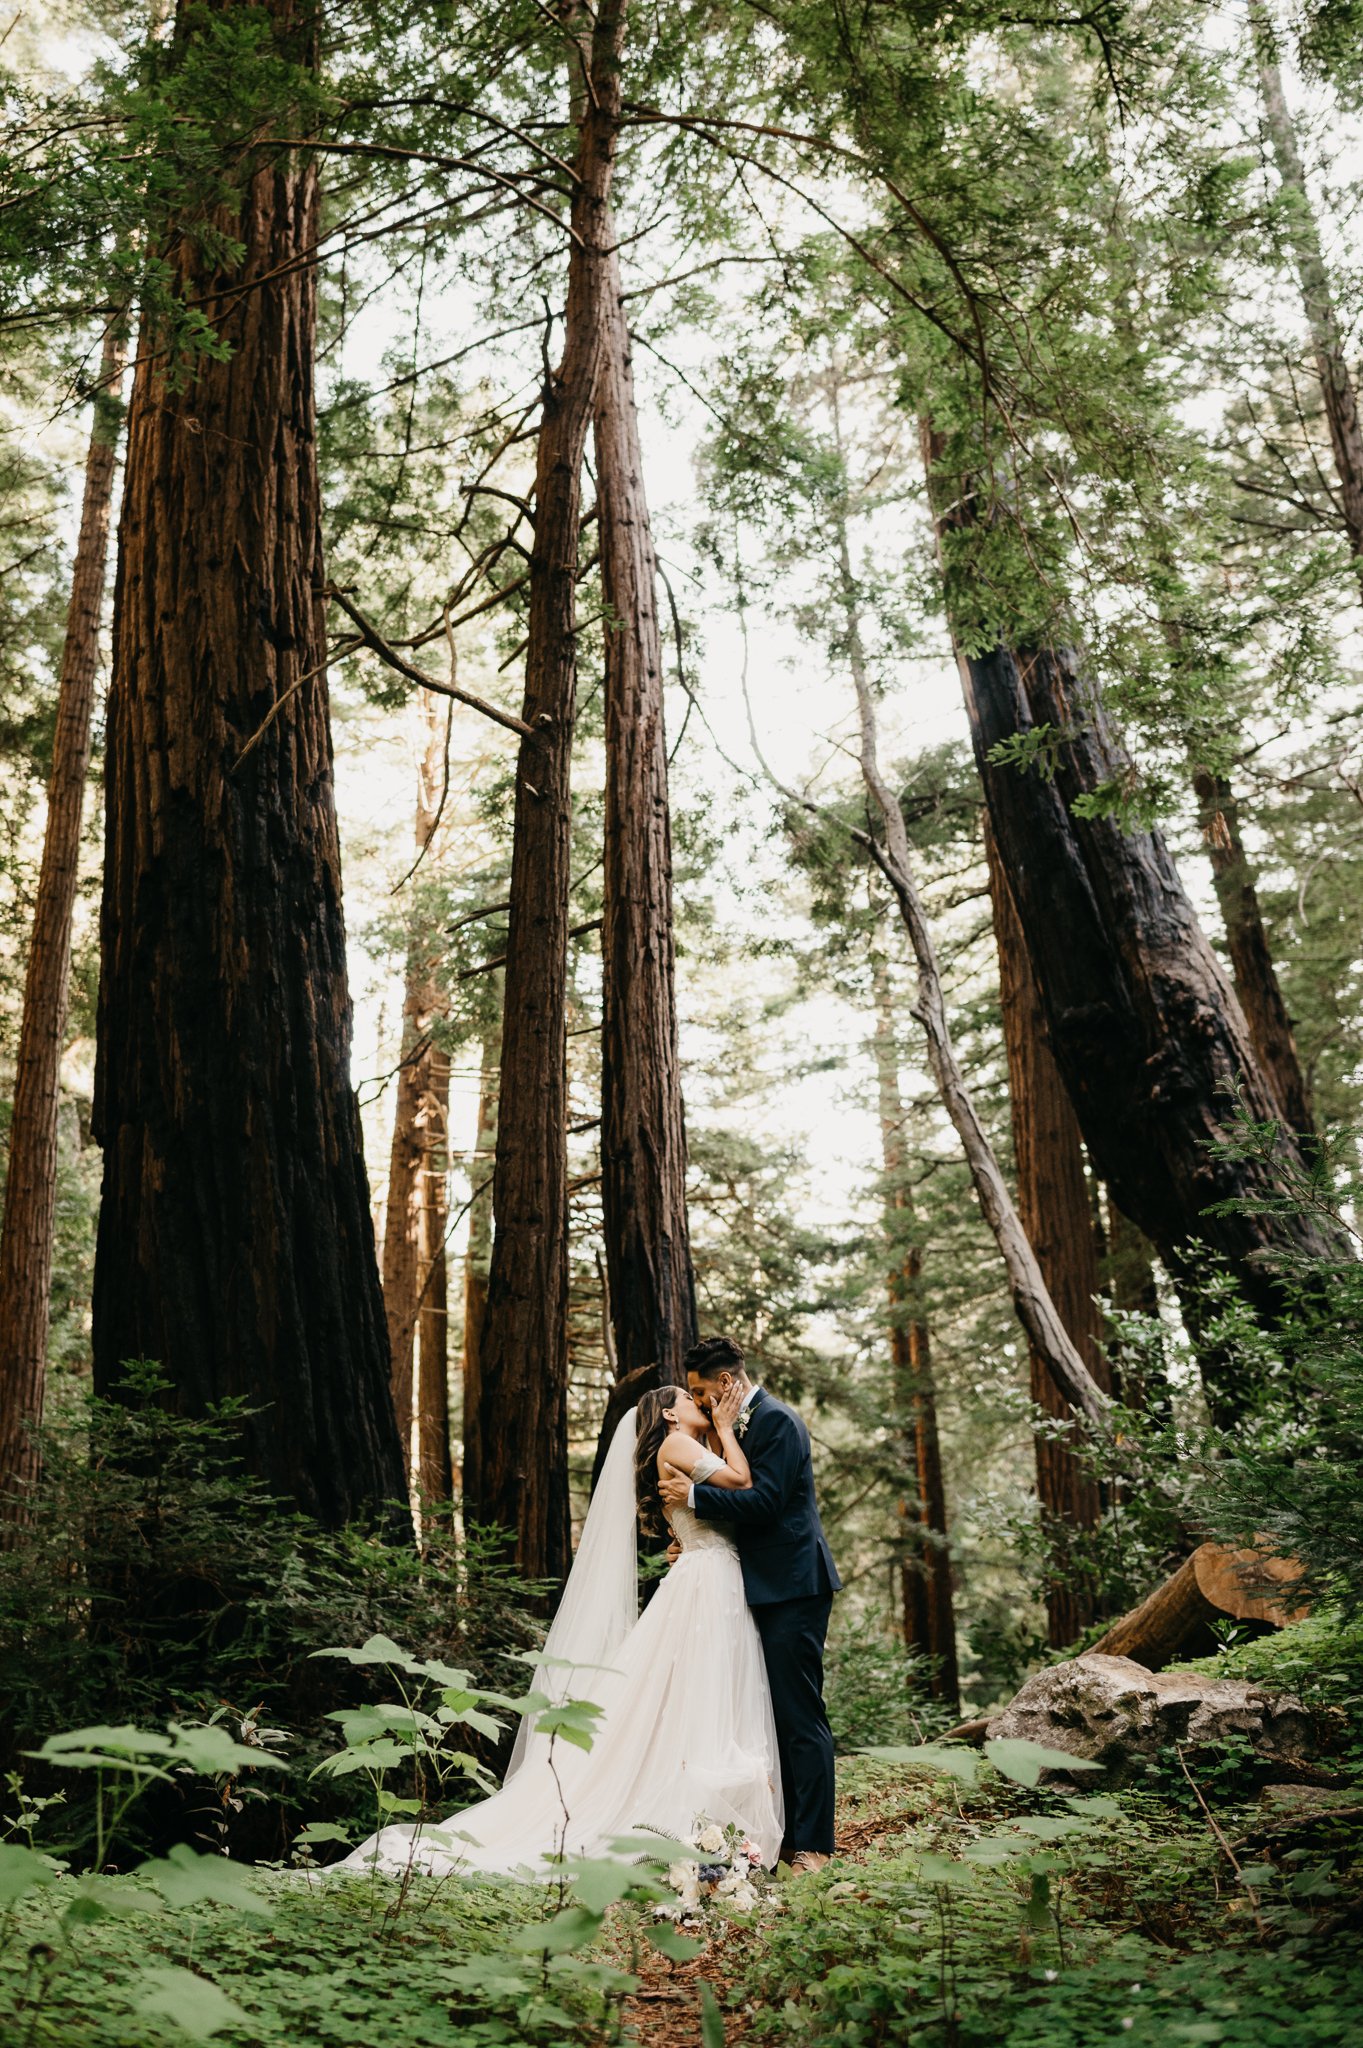 bride and groom in wedding dress and suit in Big Sur Forest large redwoods in background